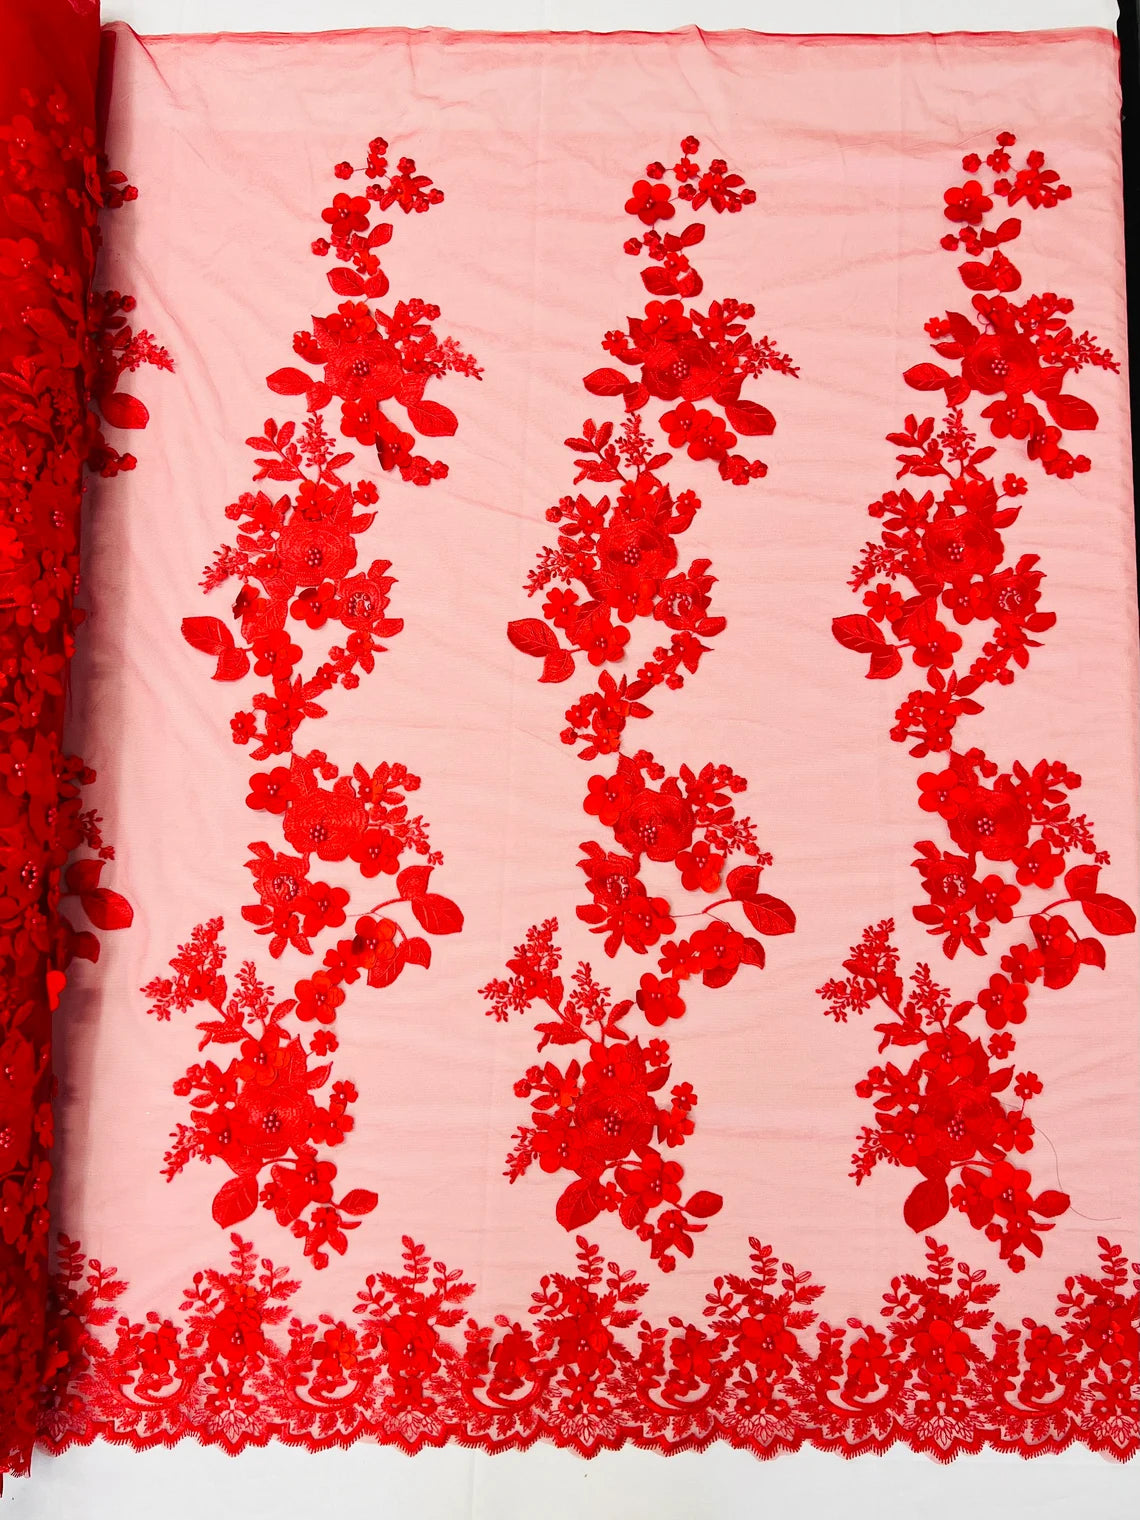 3D Flower Panels Fabric - Red - Flower Panels Bead Embroidered on Lace Fabric Sold By Yard